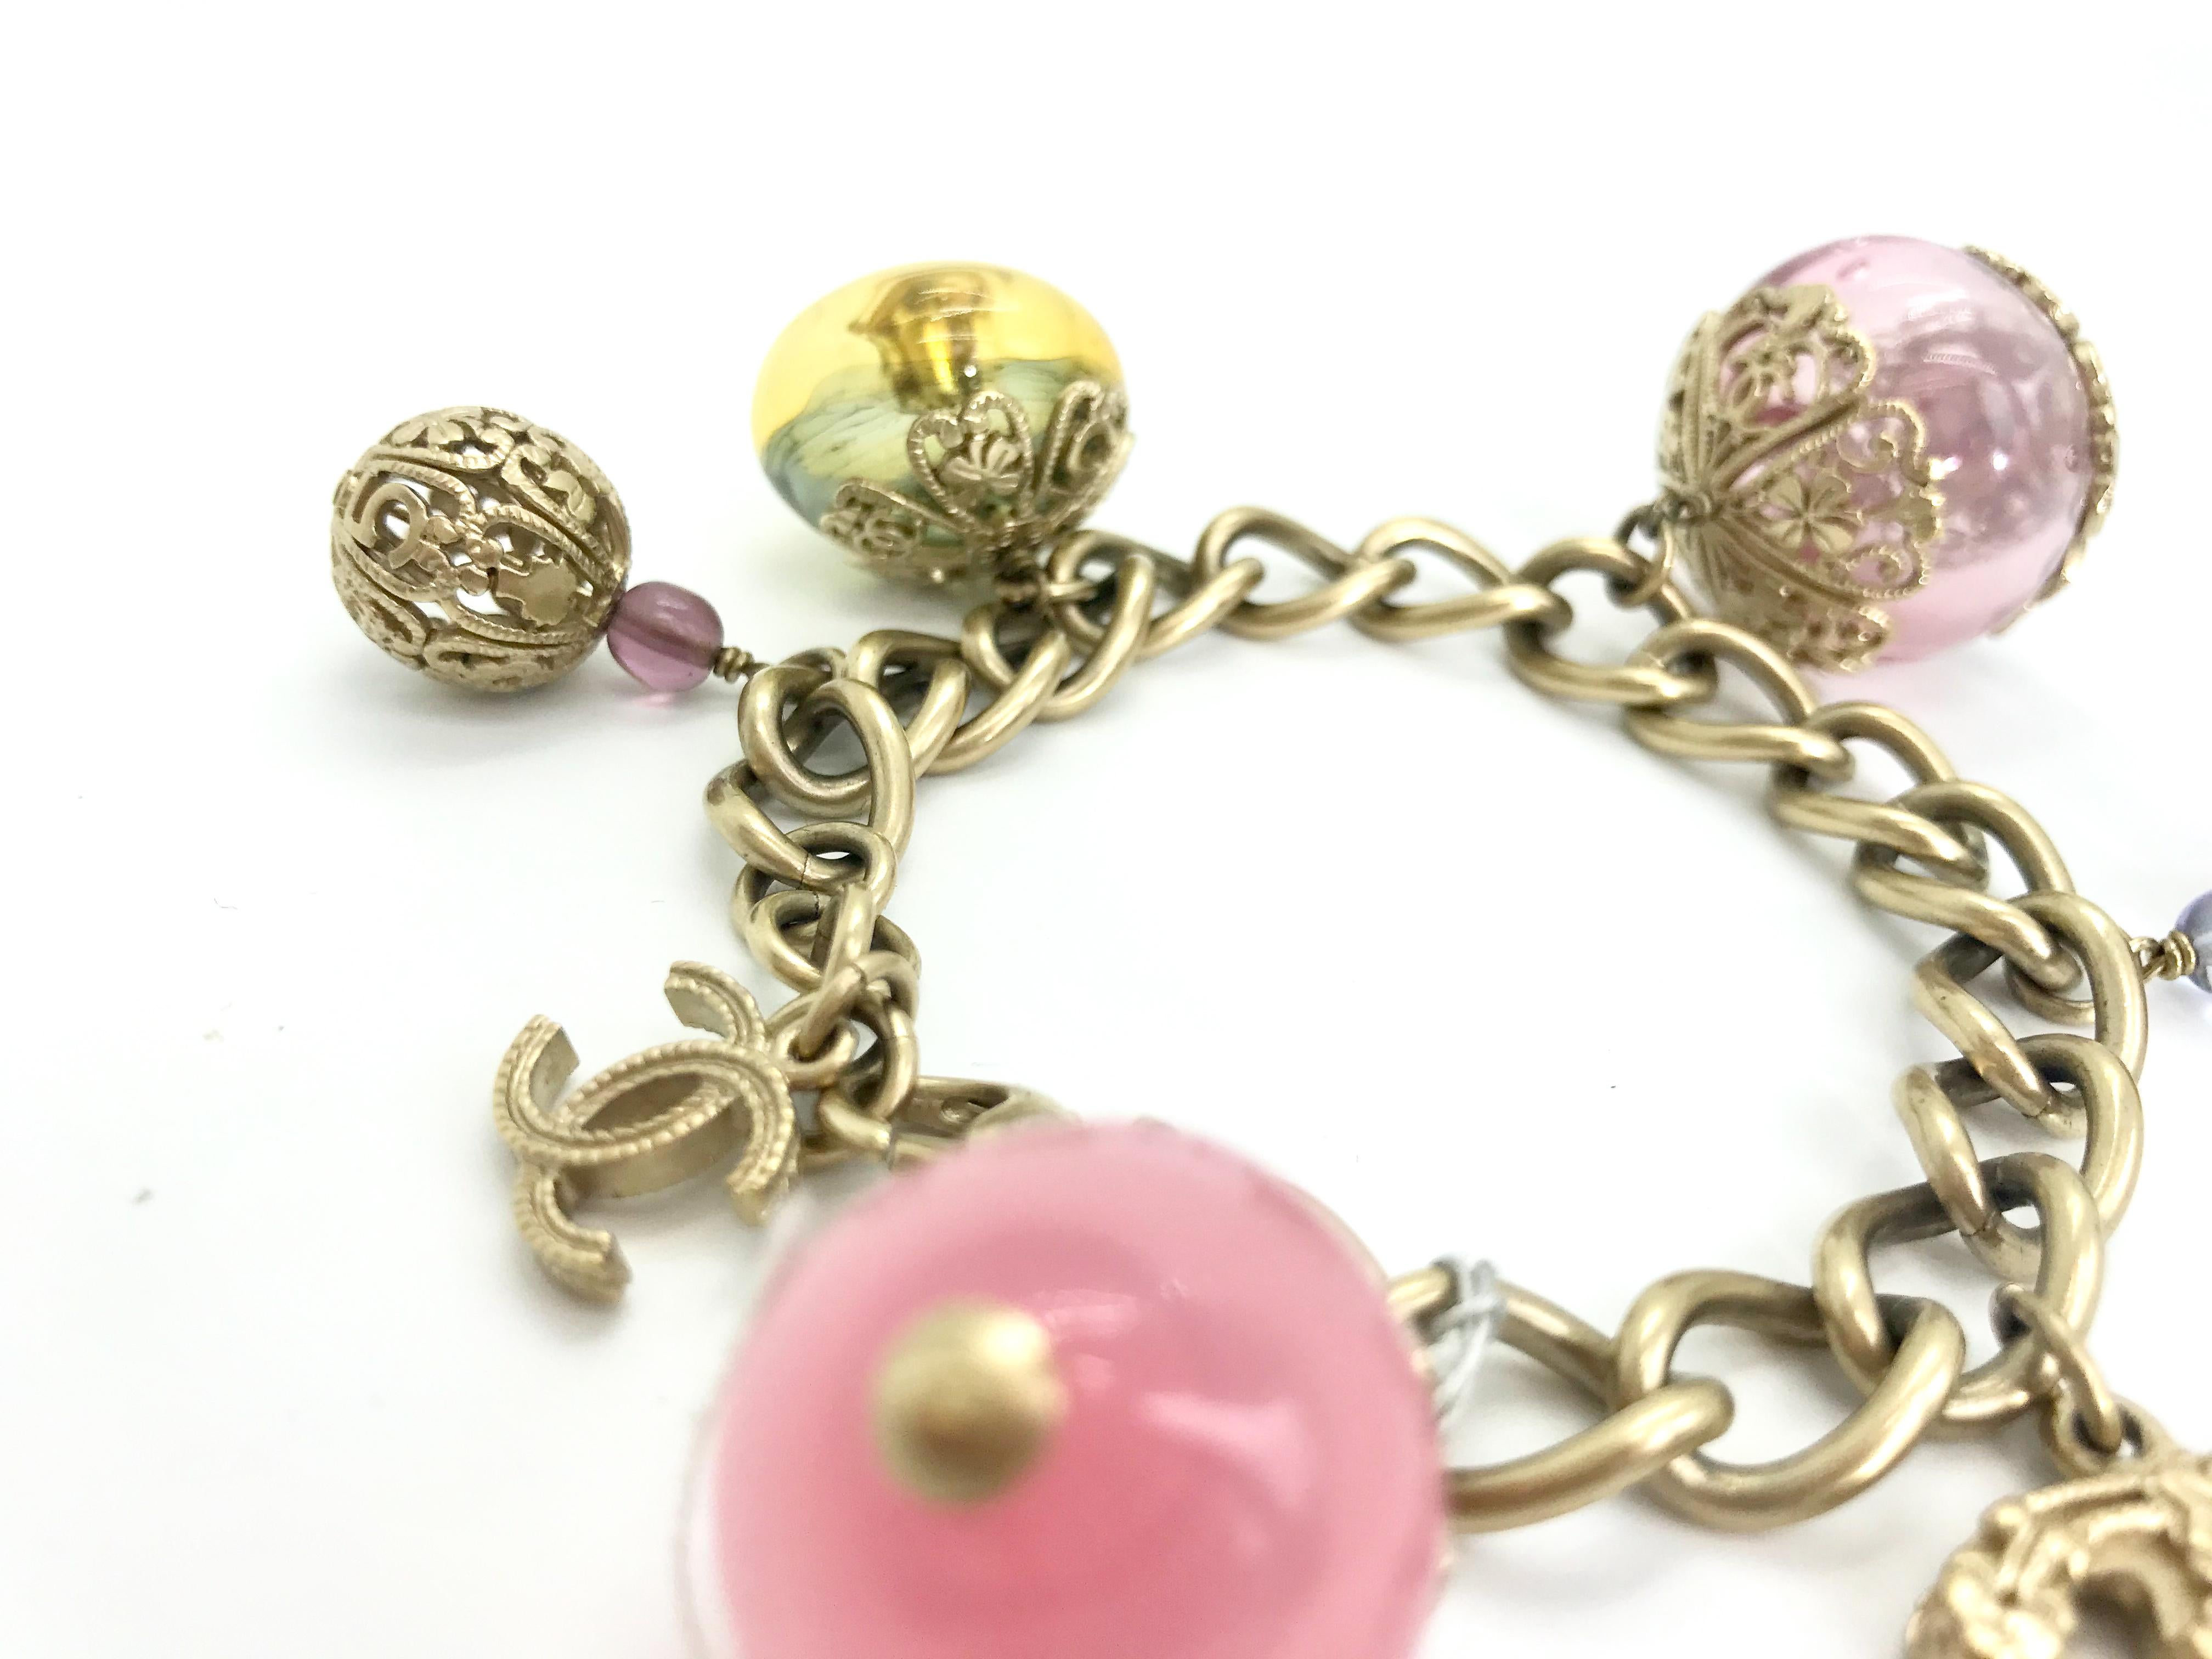 Brushed silver tone metal with pink and yellow toned glass globe charms, interlocking 'CC' logo detail and lobster clasp closure. From the Spring 2006 collection (marked on clasp).

Beautiful fine filigree detailing on the glass charms.  Features